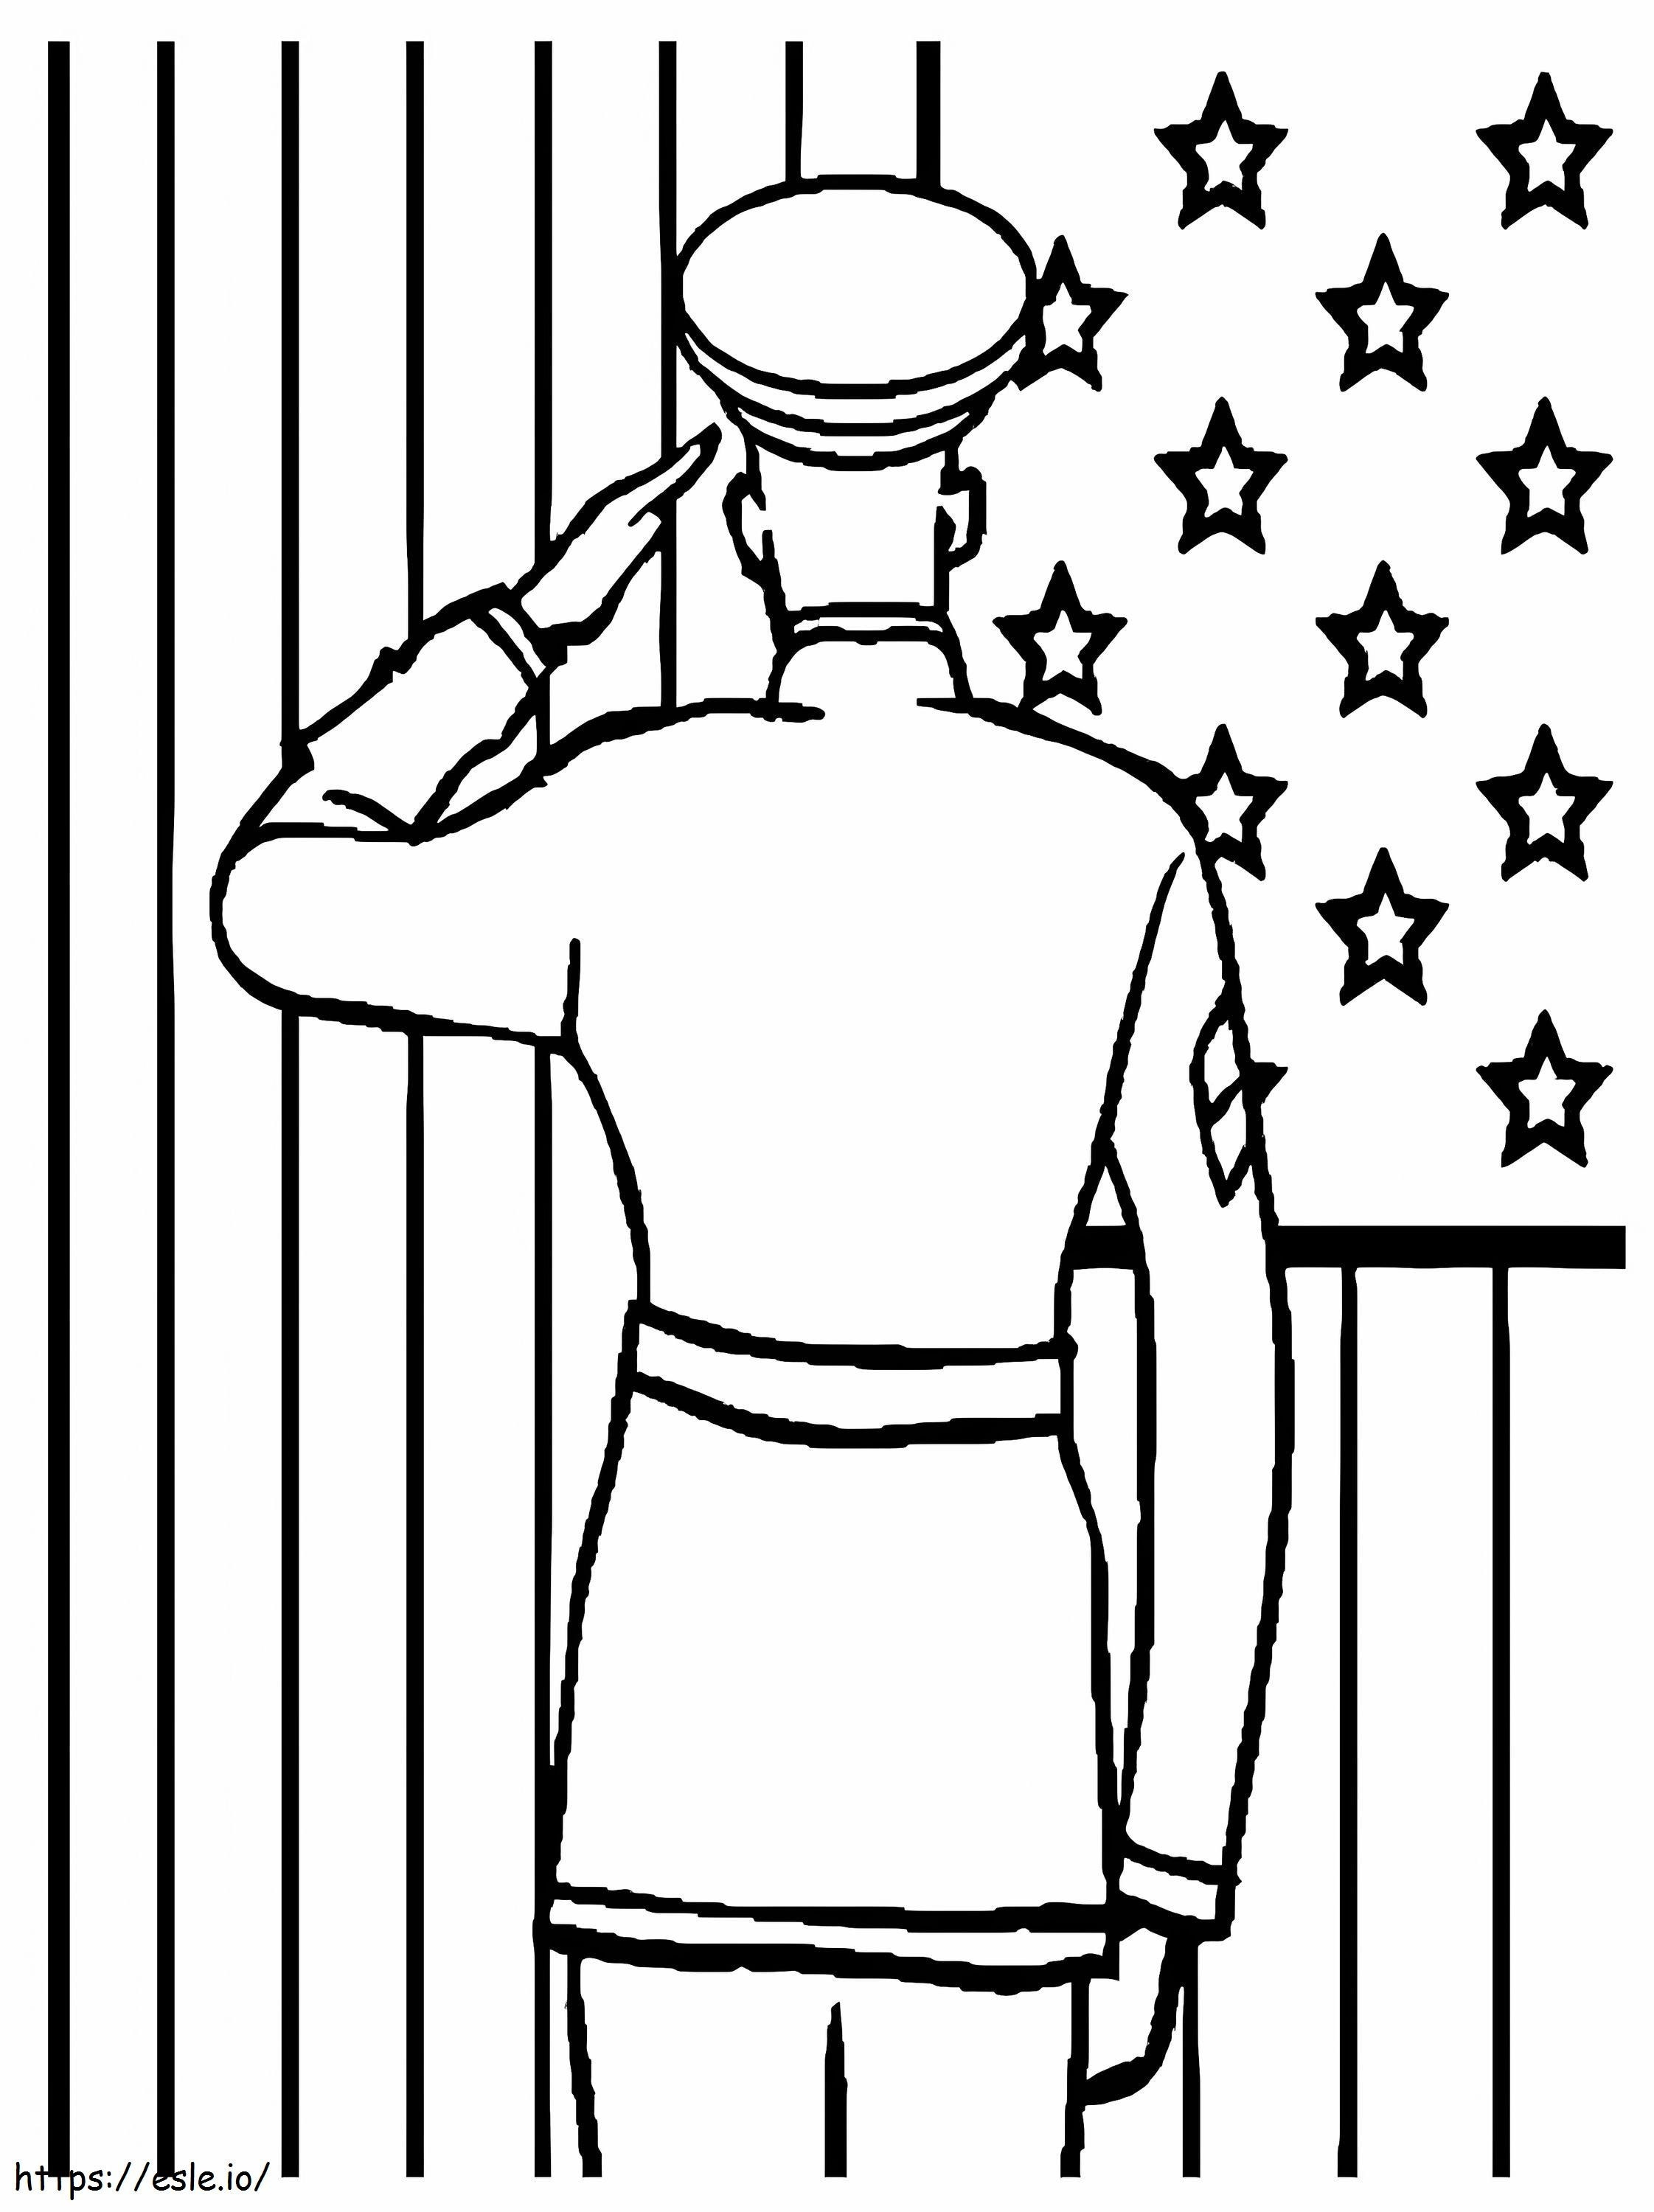 Happy Veterans Day 2 coloring page